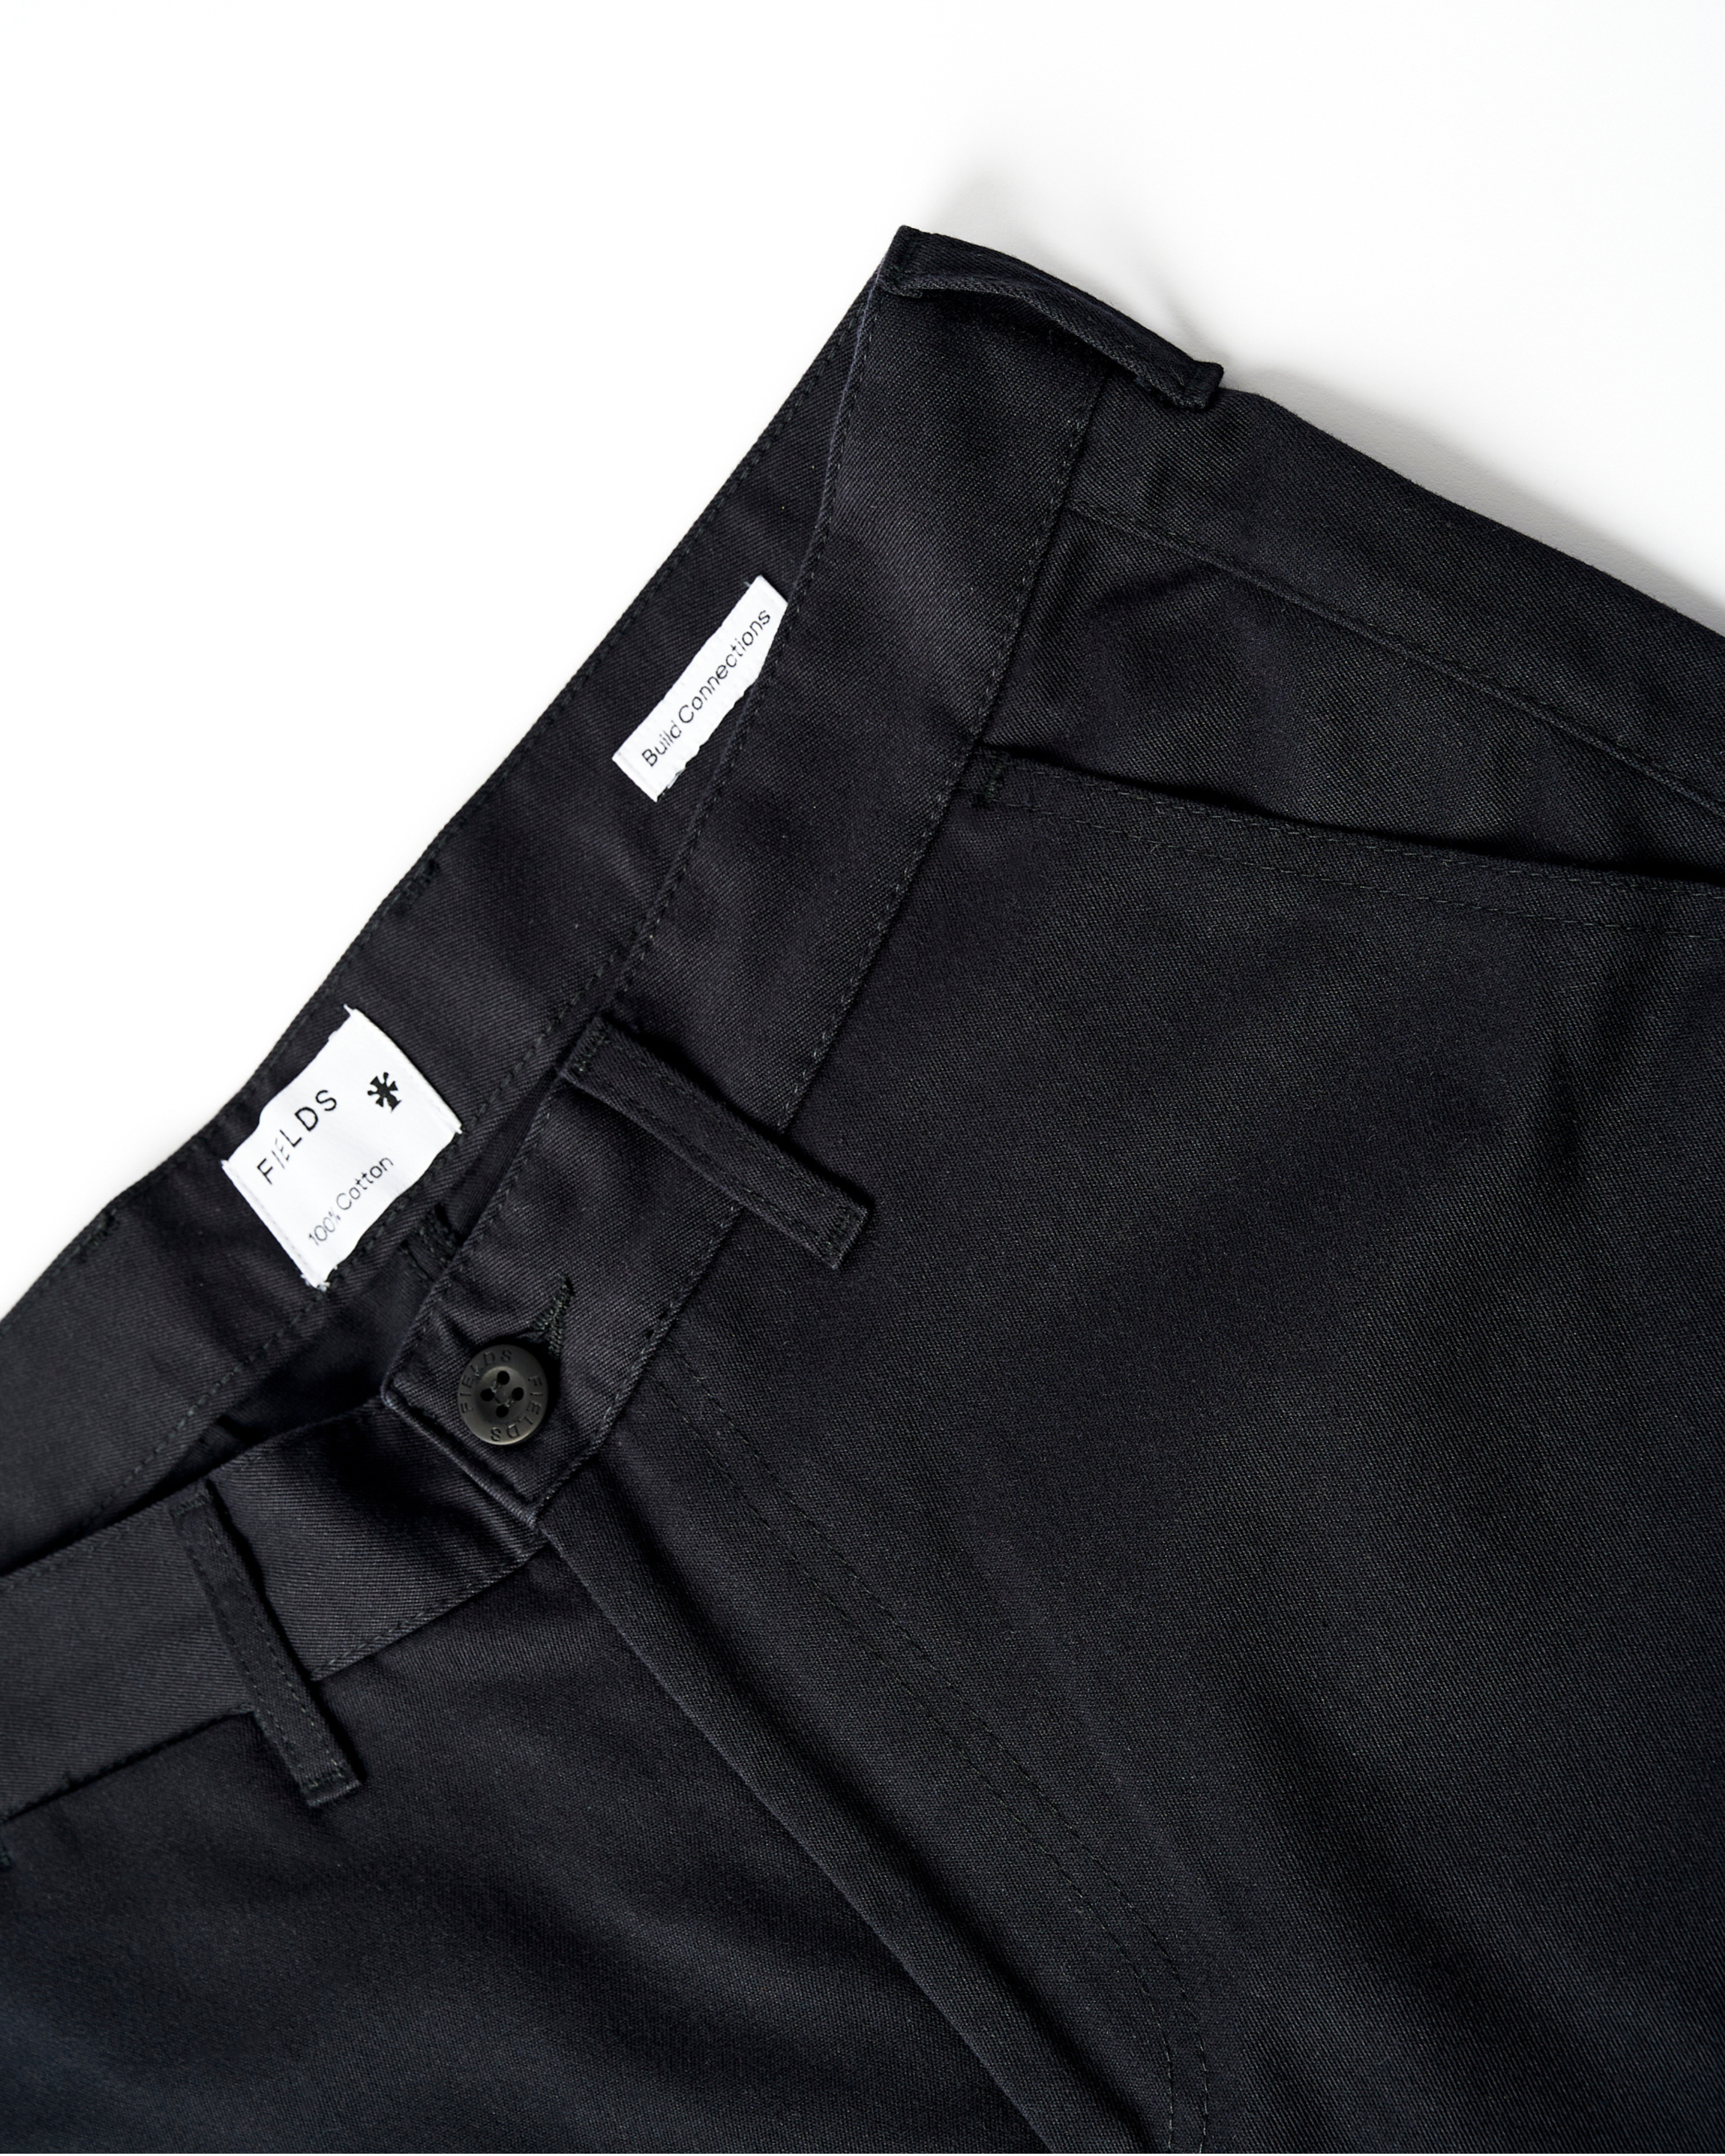 The Cotton Twill Straight Leg Trouser in Black Beauty